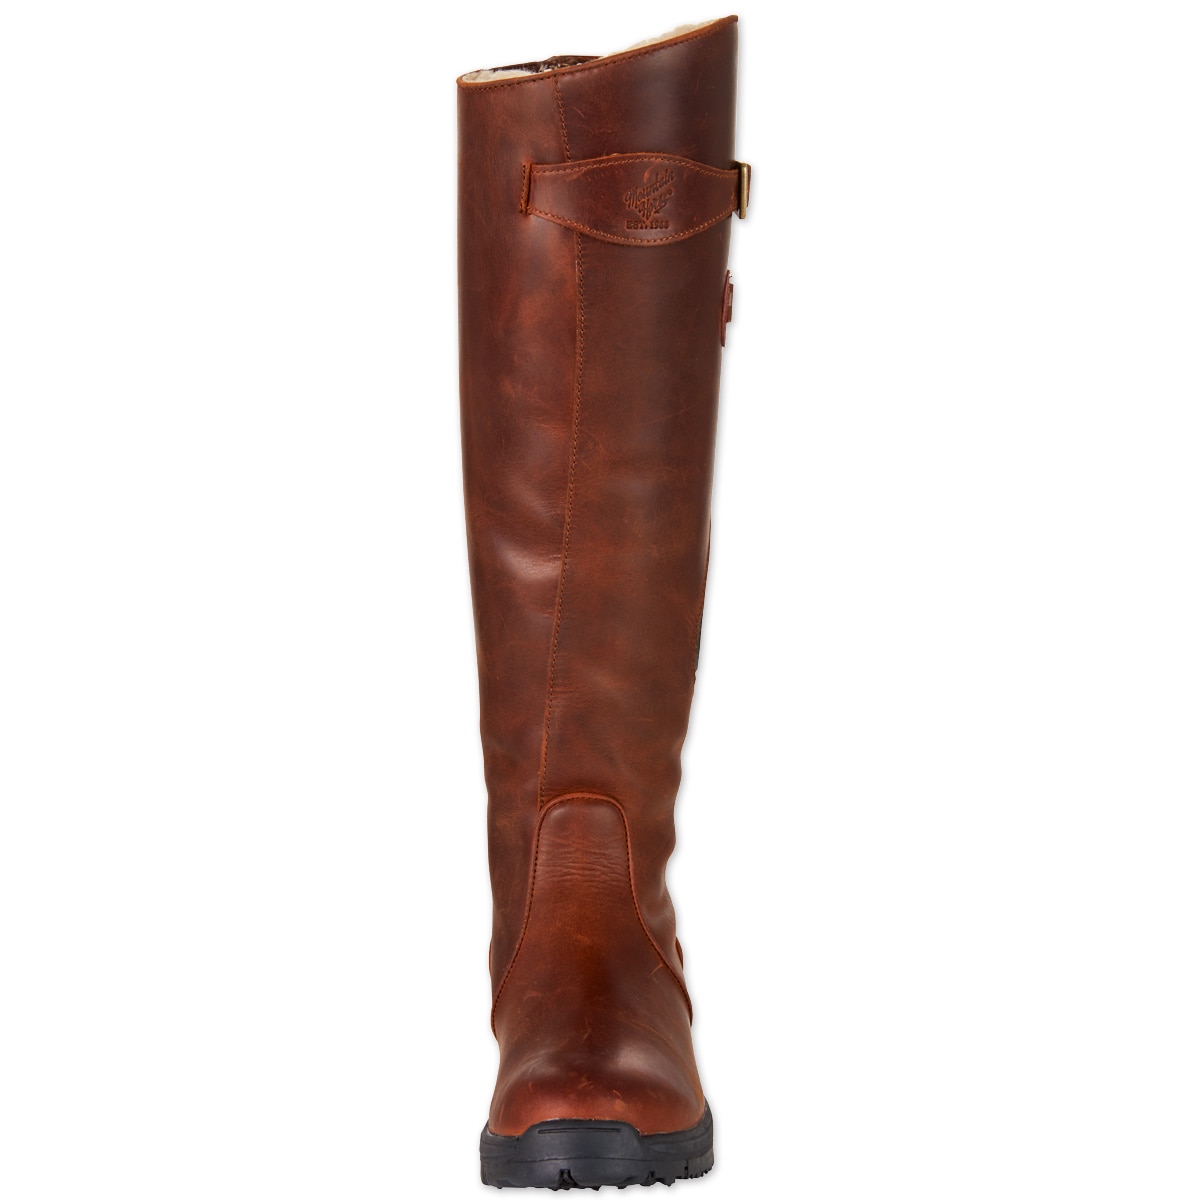 Mountain Horse Snowy River Tall Winter Boot